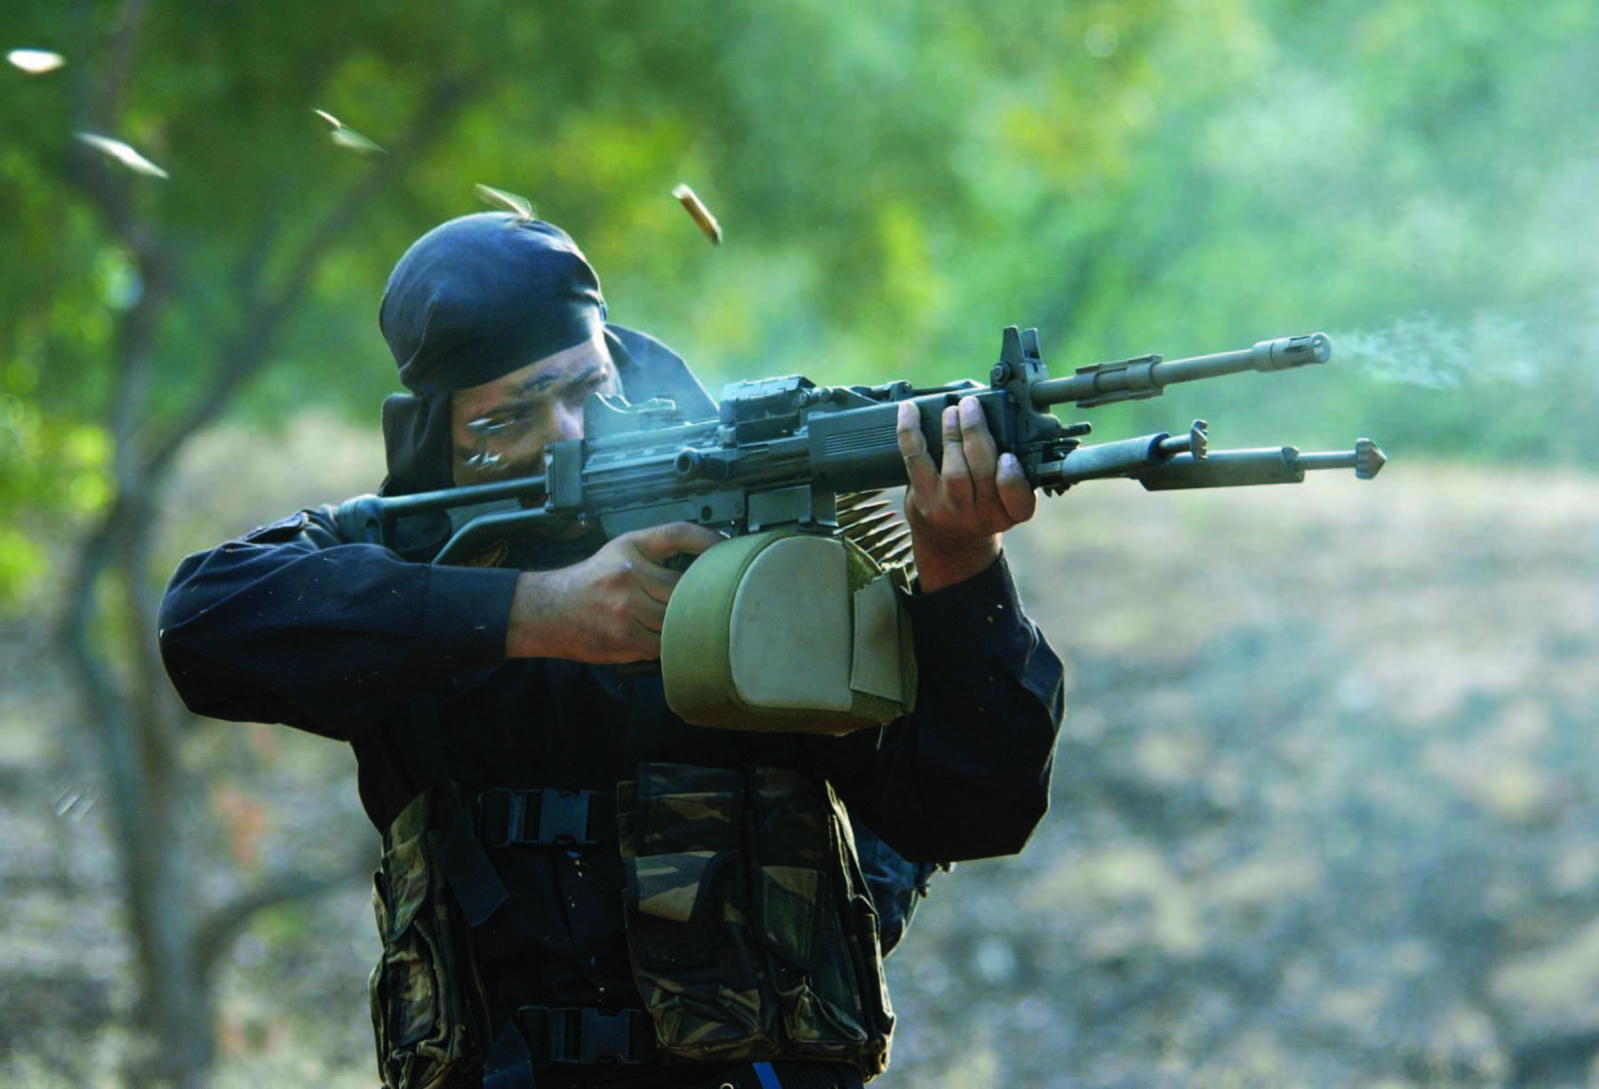 A member of the Indian Special Forces fires his weapon 1599x1089